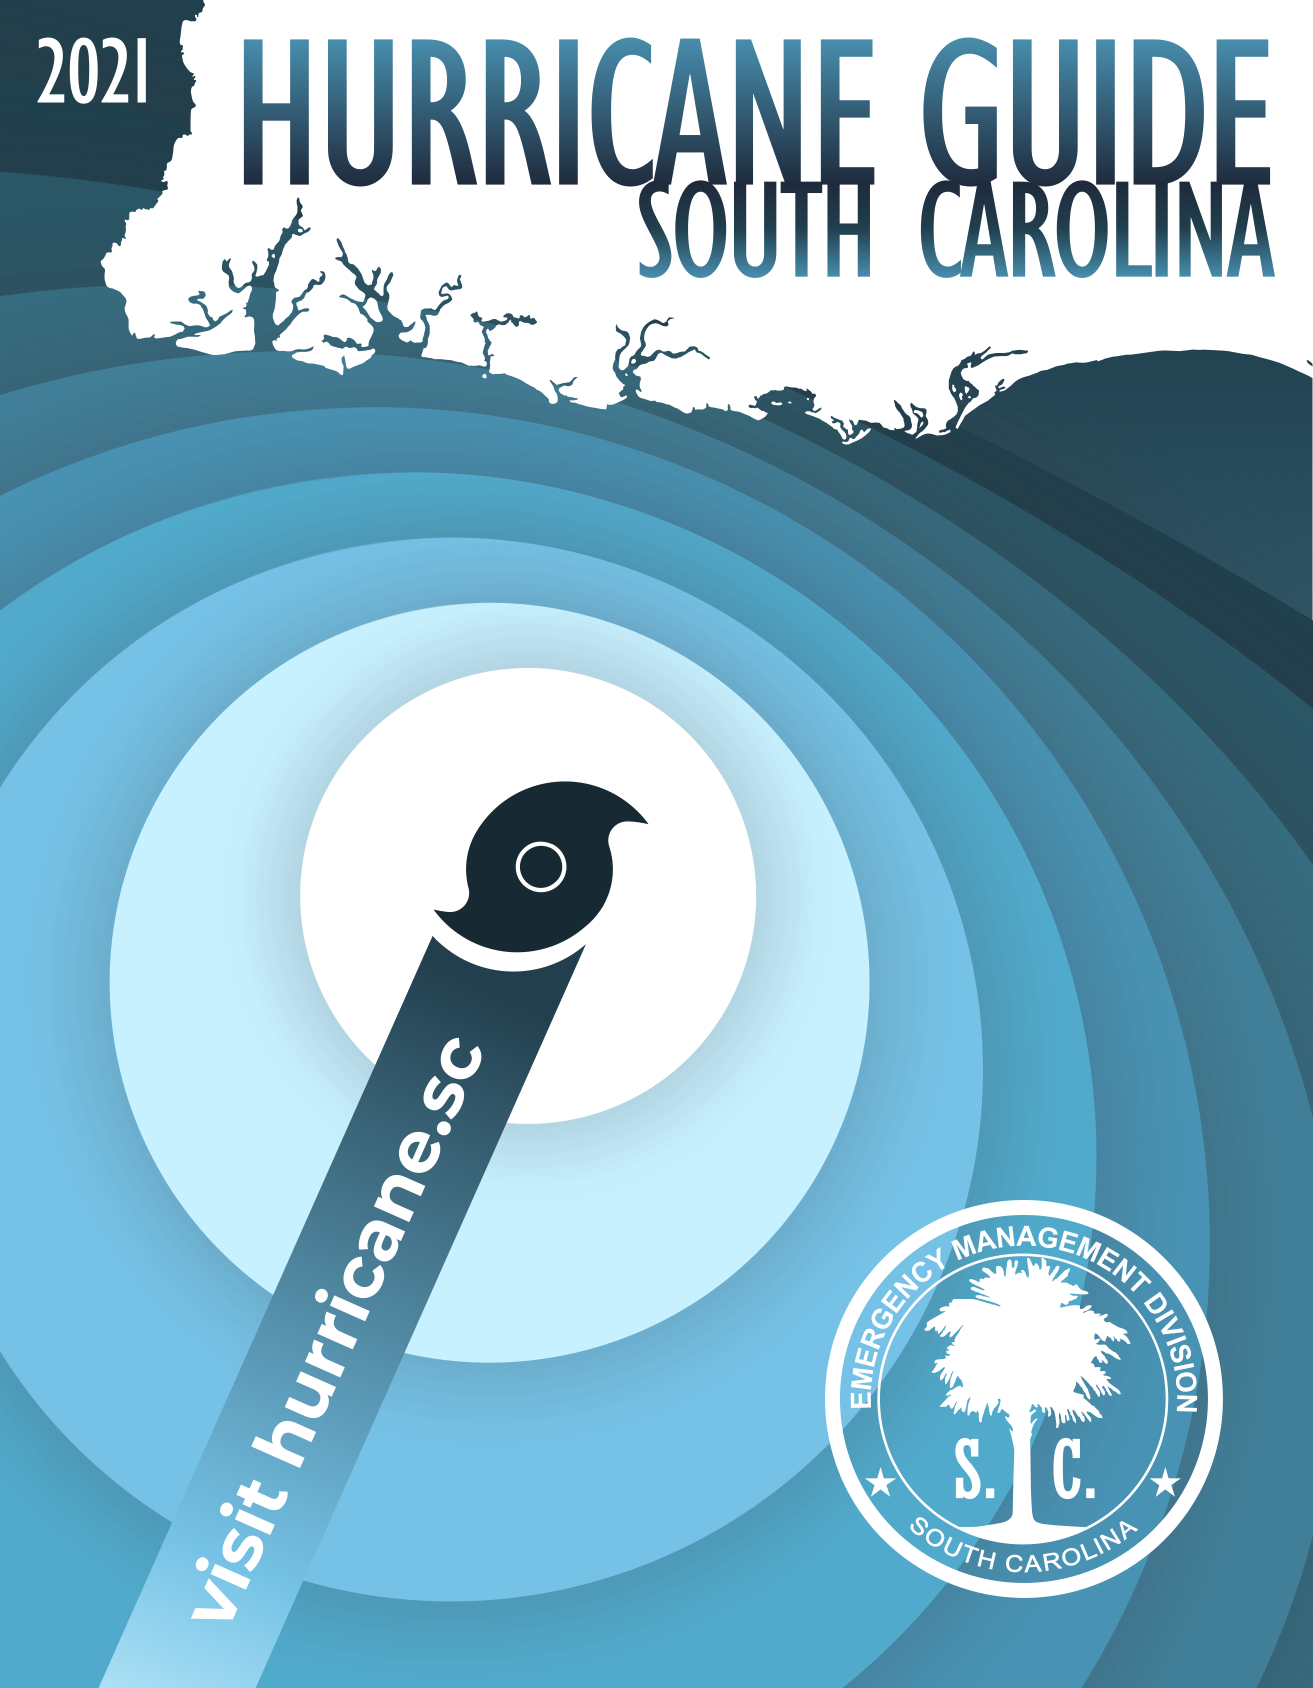 2021 Hurricane Guide Available on County Website